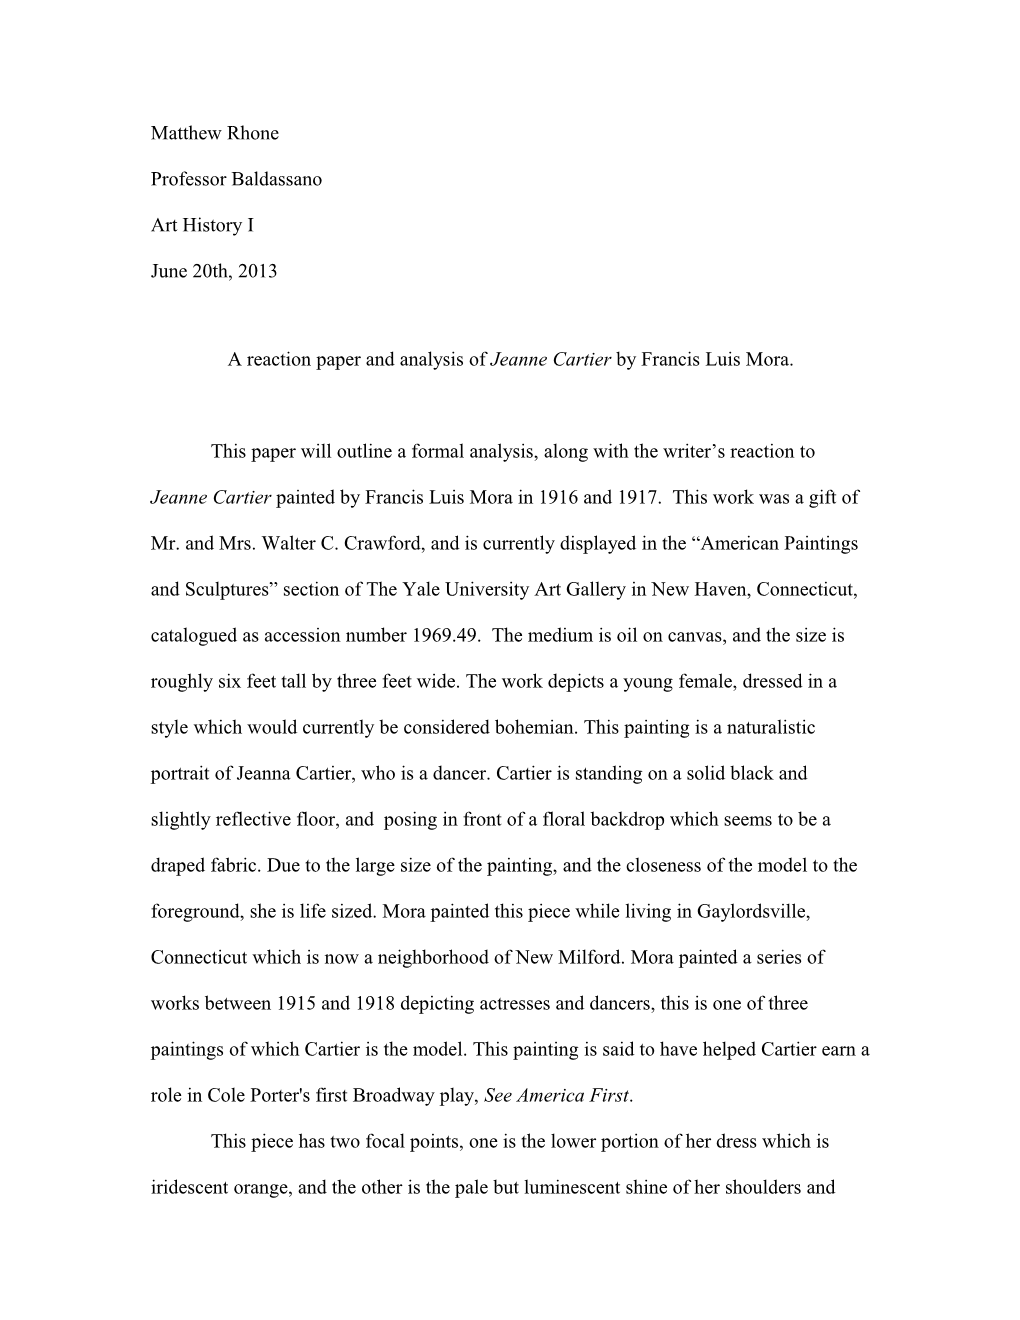 A Reaction Paper and Analysis of Jeanne Cartier by Francis Luis Mora